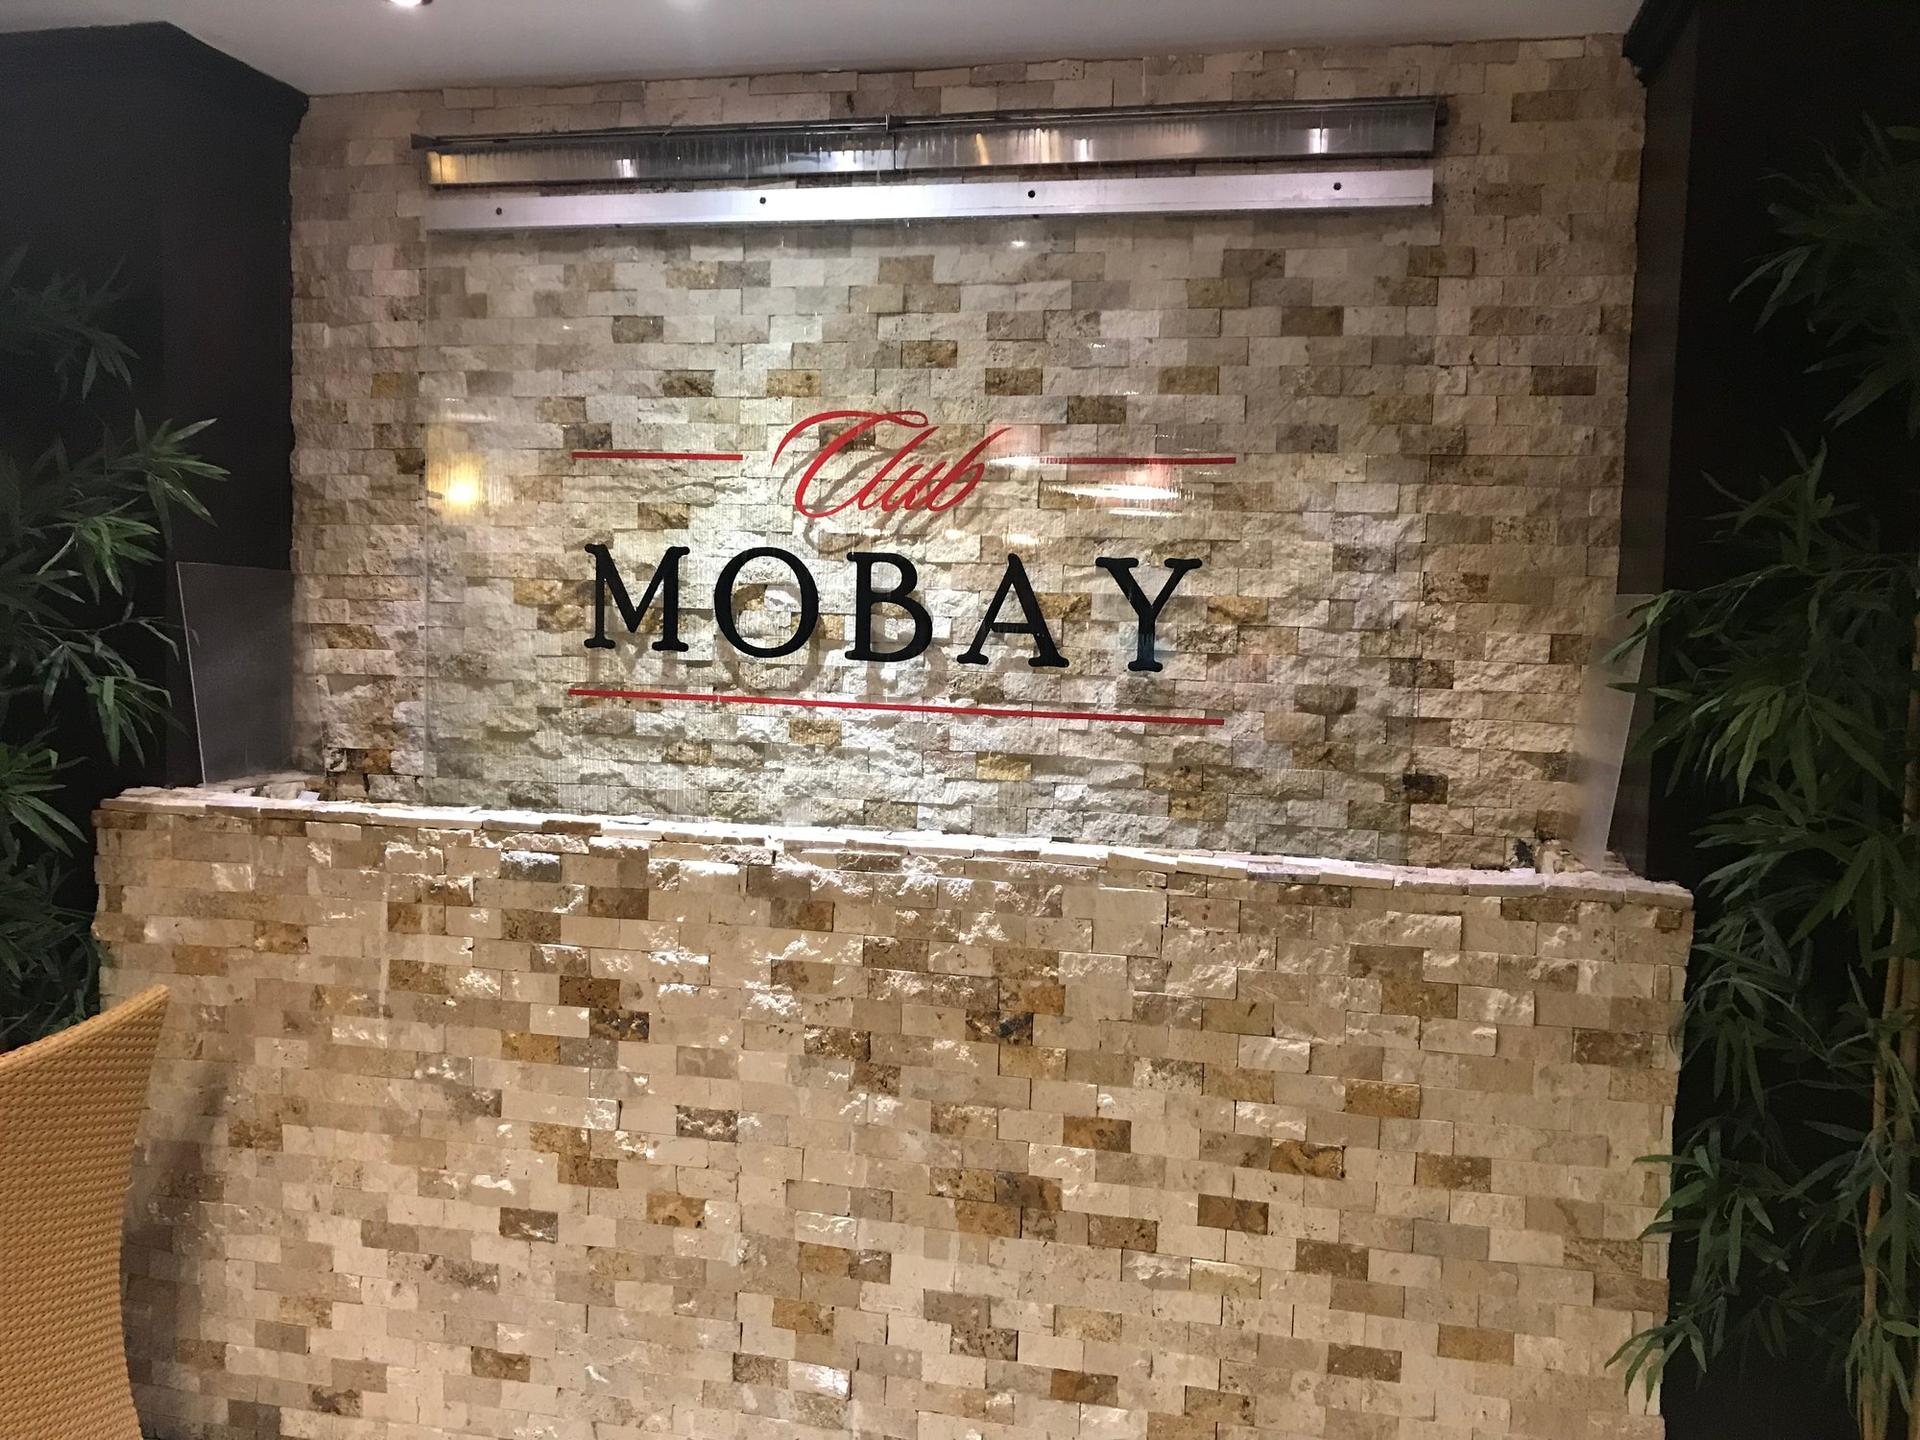 Club Mobay Arrivals Lounge image 4 of 17